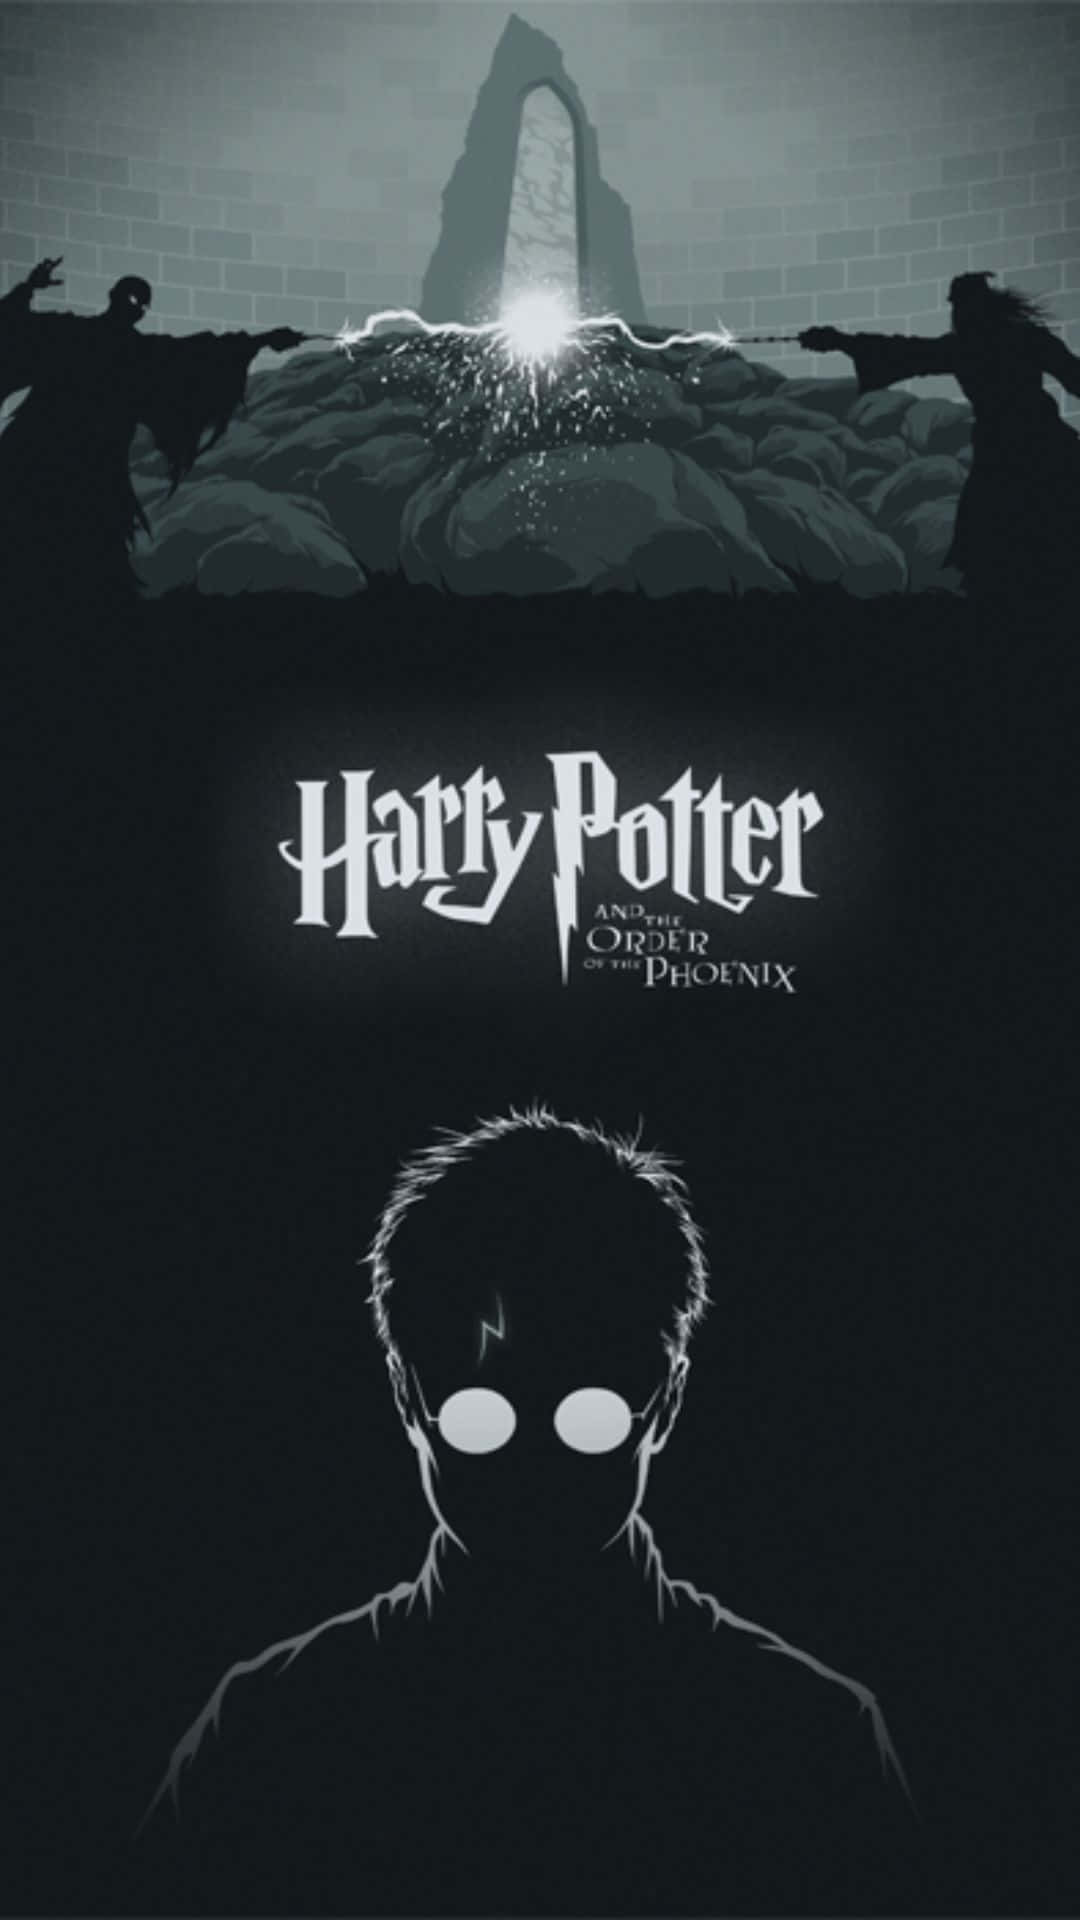 Image  A Silhouette Of Harry Potter On Platform 9 3/4 Wallpaper